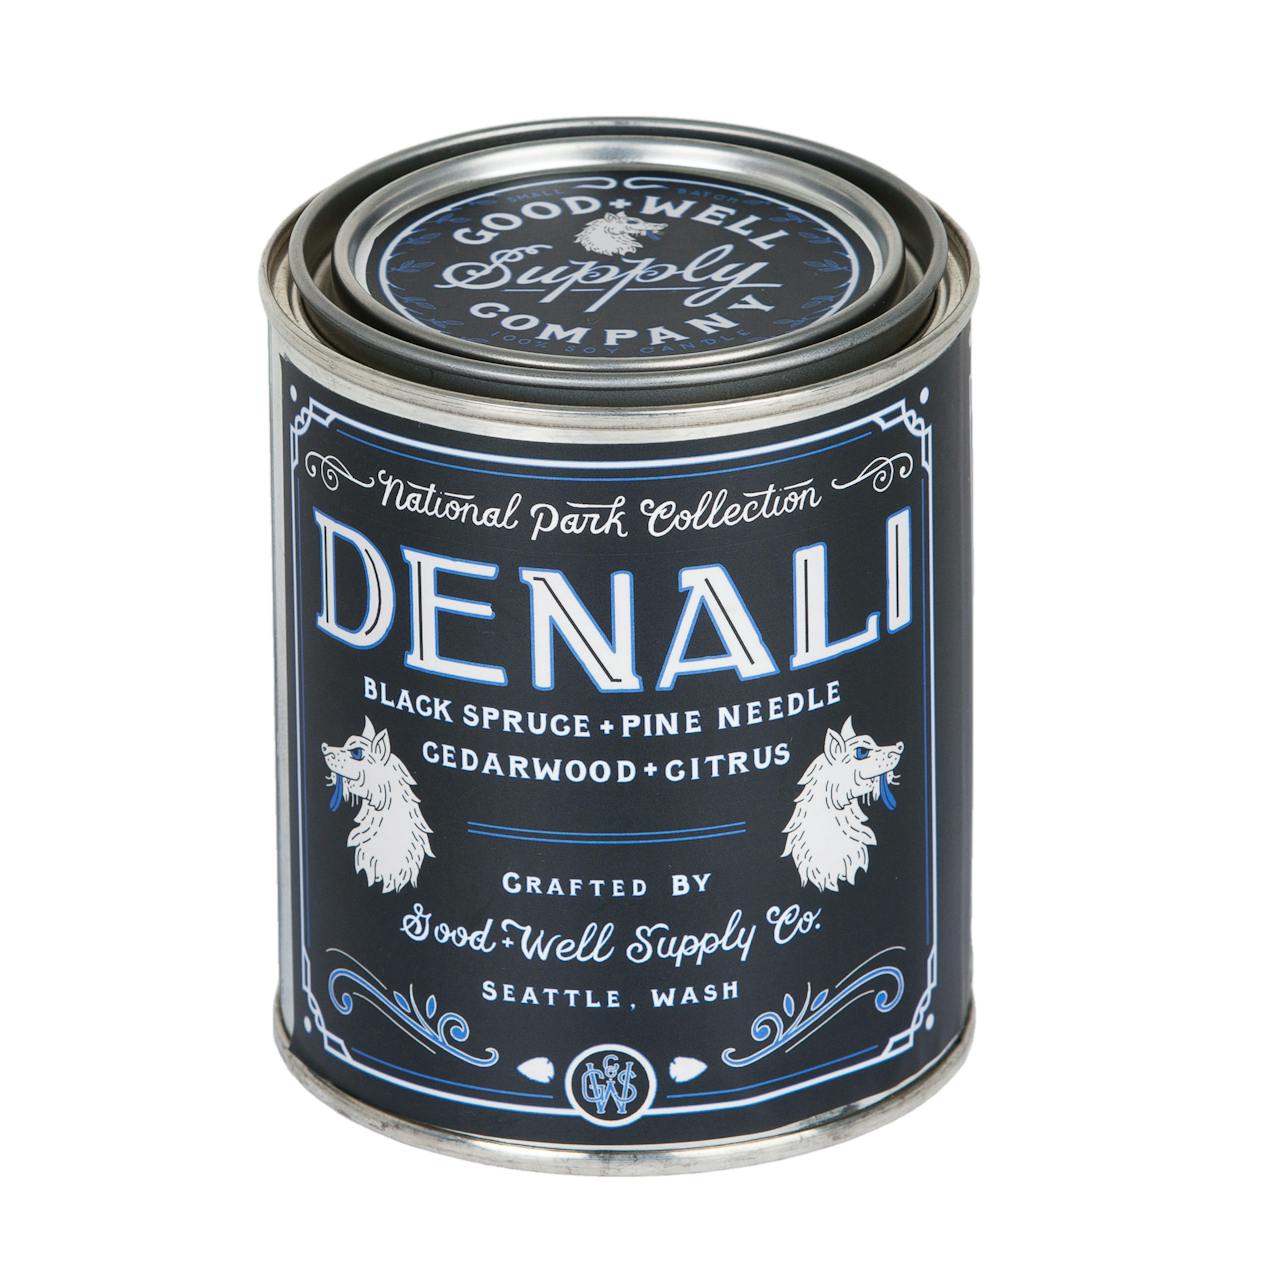 Good + Well Supply Co. Denali National Park Candle